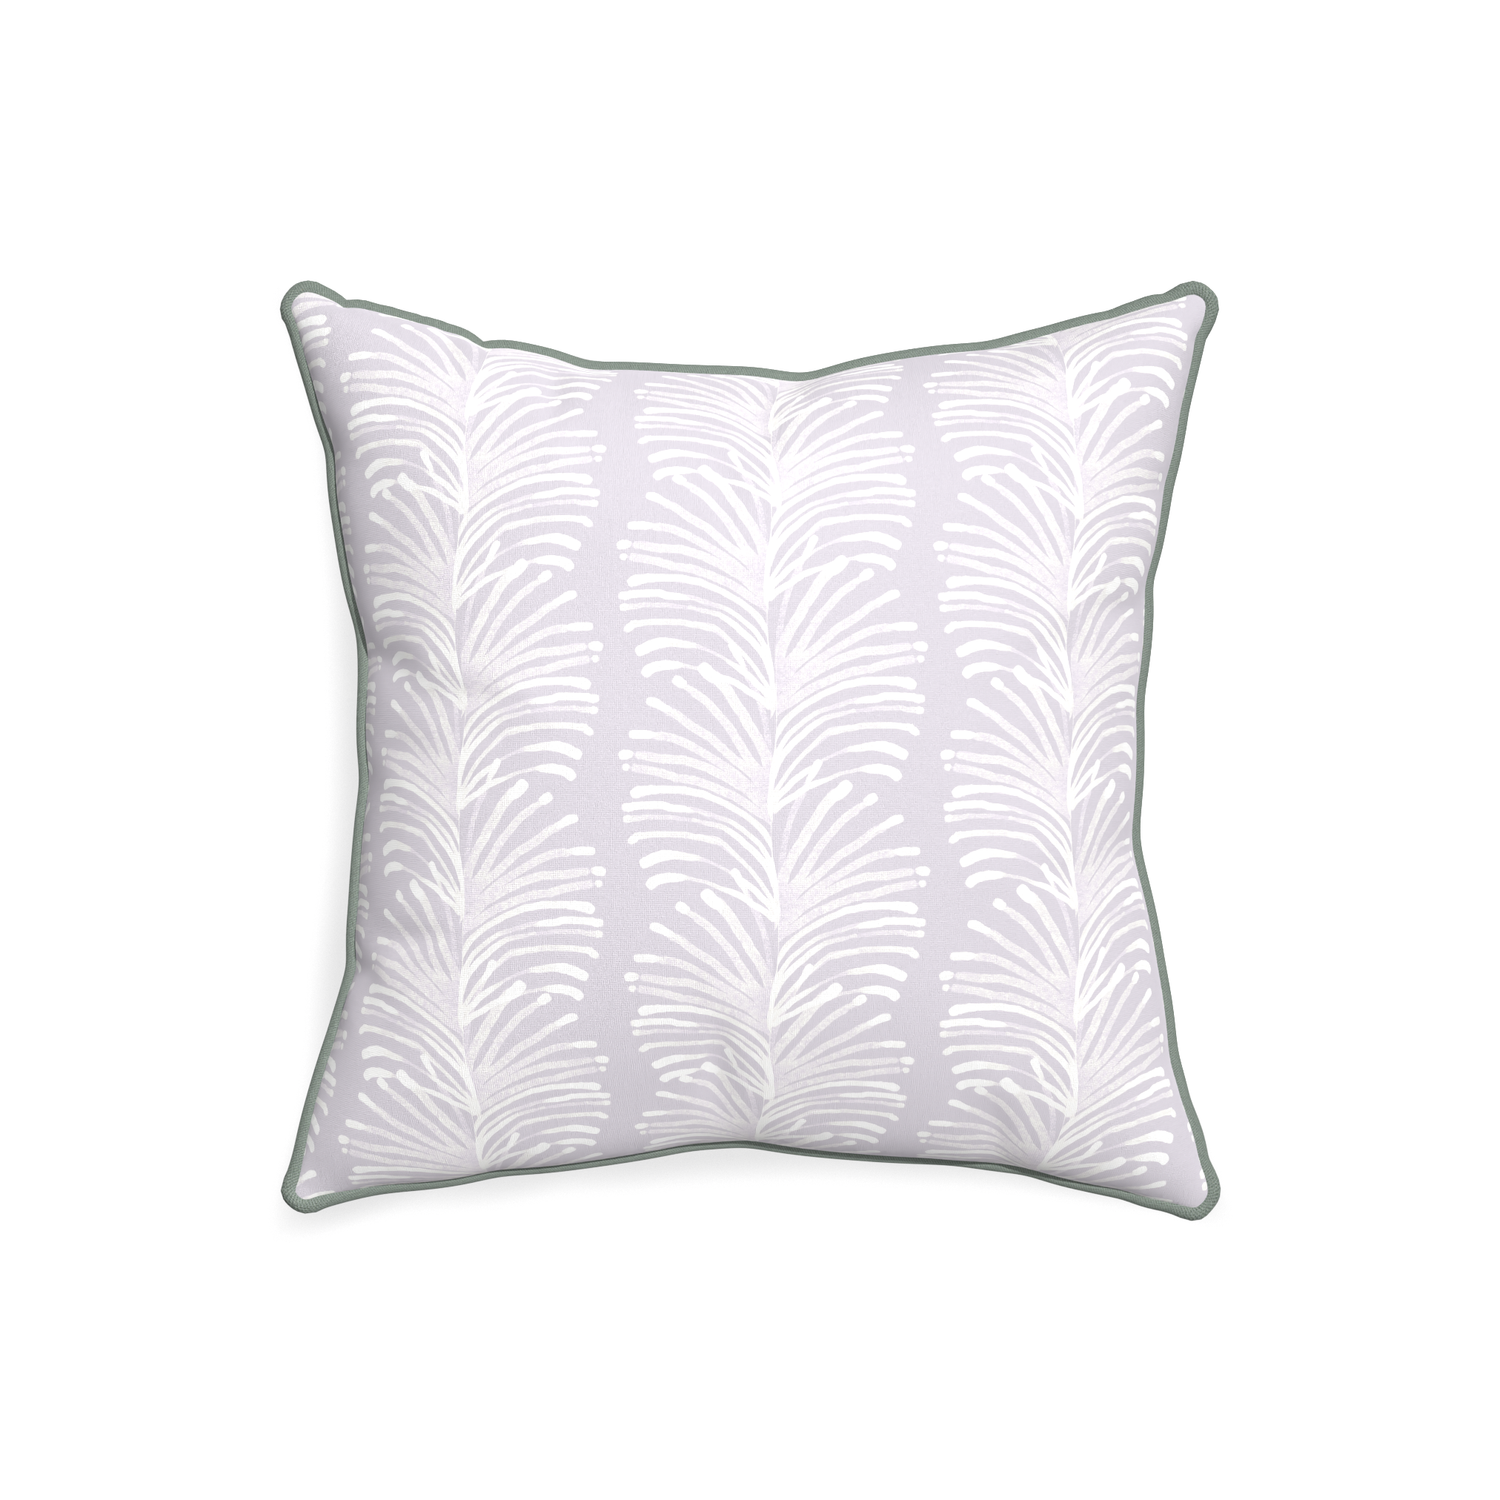 20-square emma lavender custom lavender botanical stripepillow with sage piping on white background